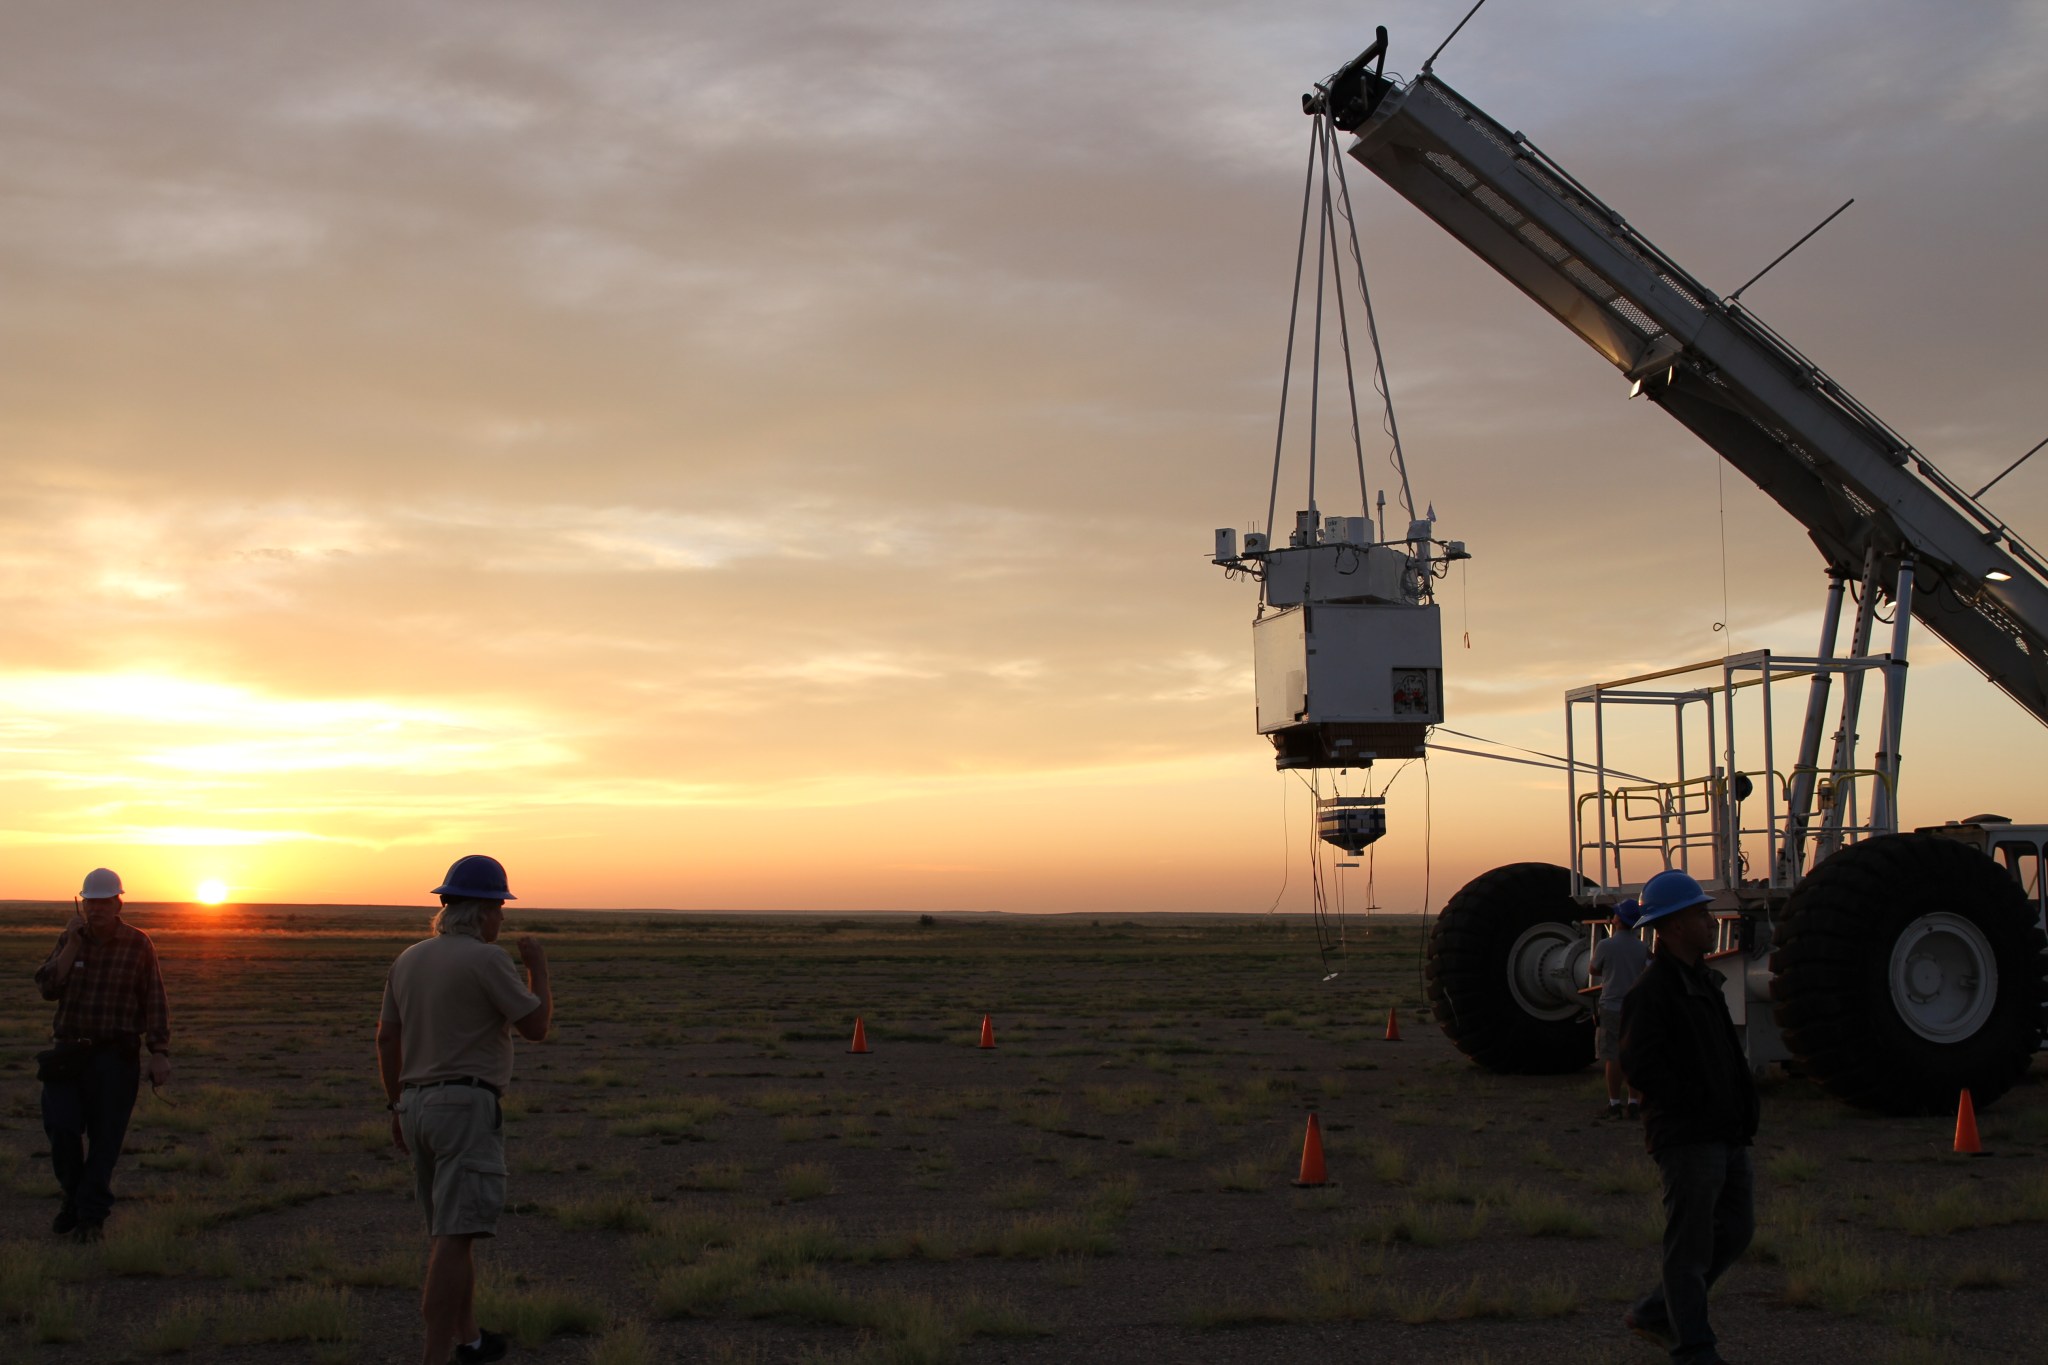 The HASP student payload hangs from a crane, the sun rising in the background.